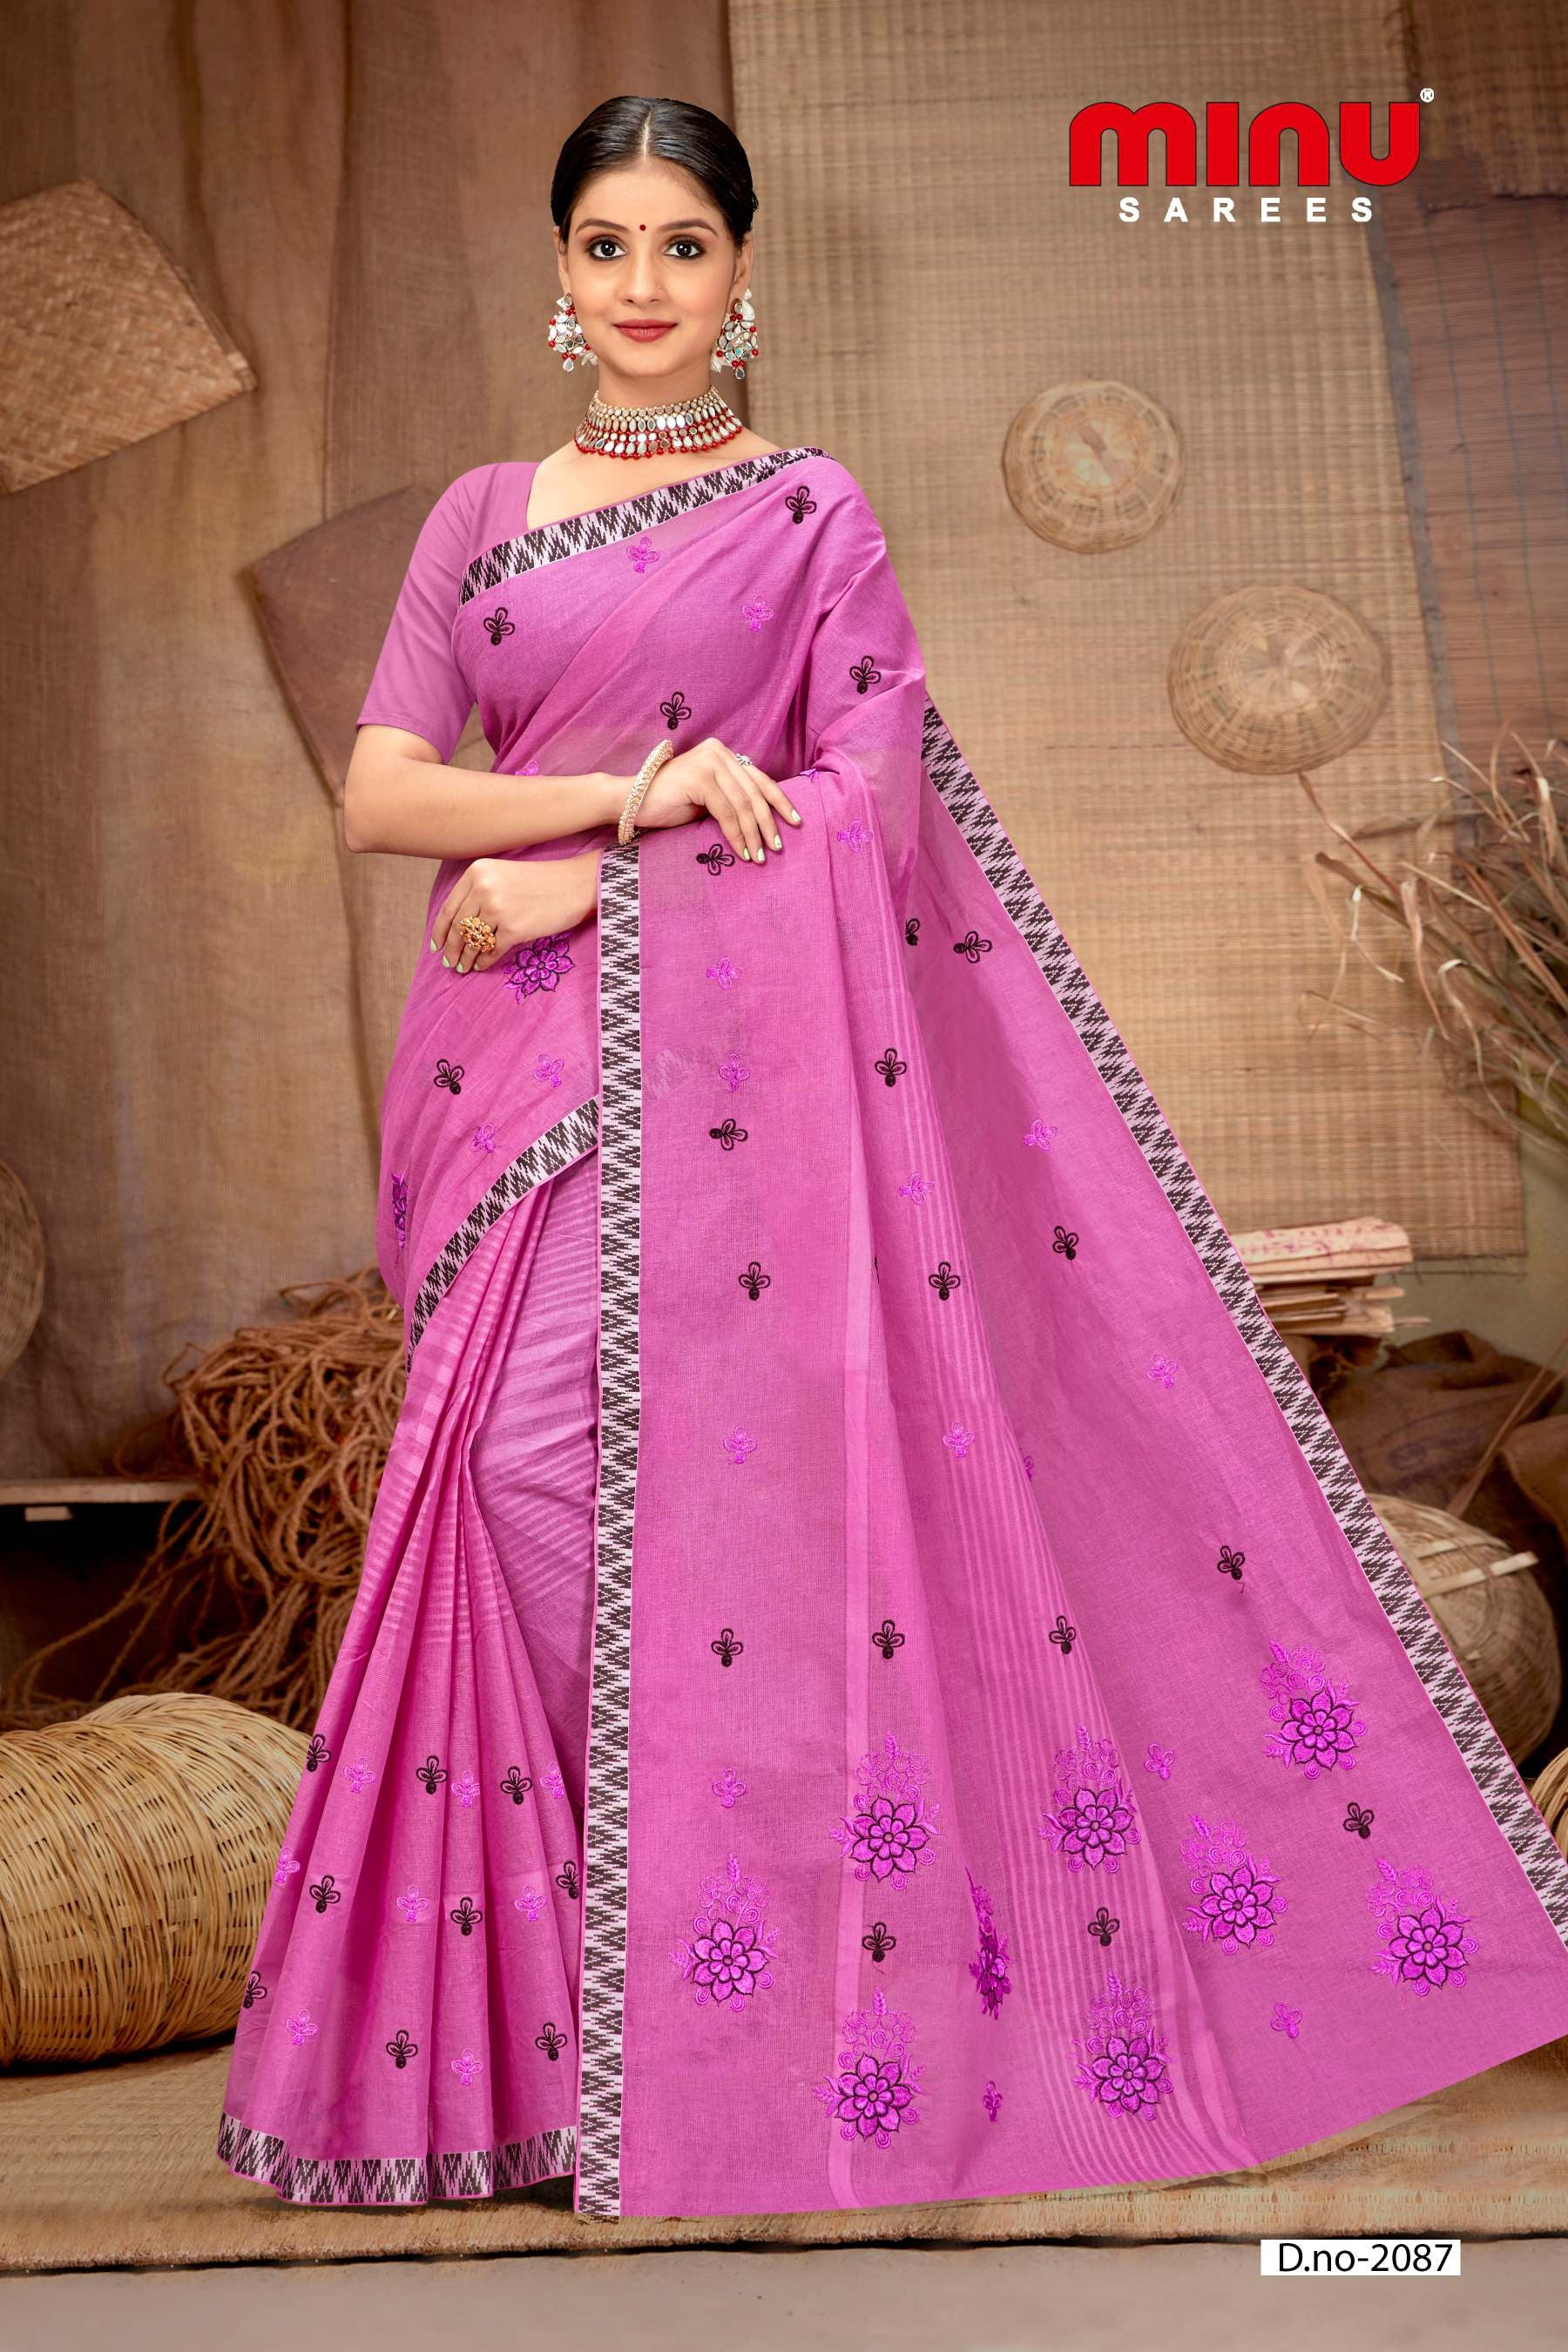 Pink printed embroidered saree wearing woman